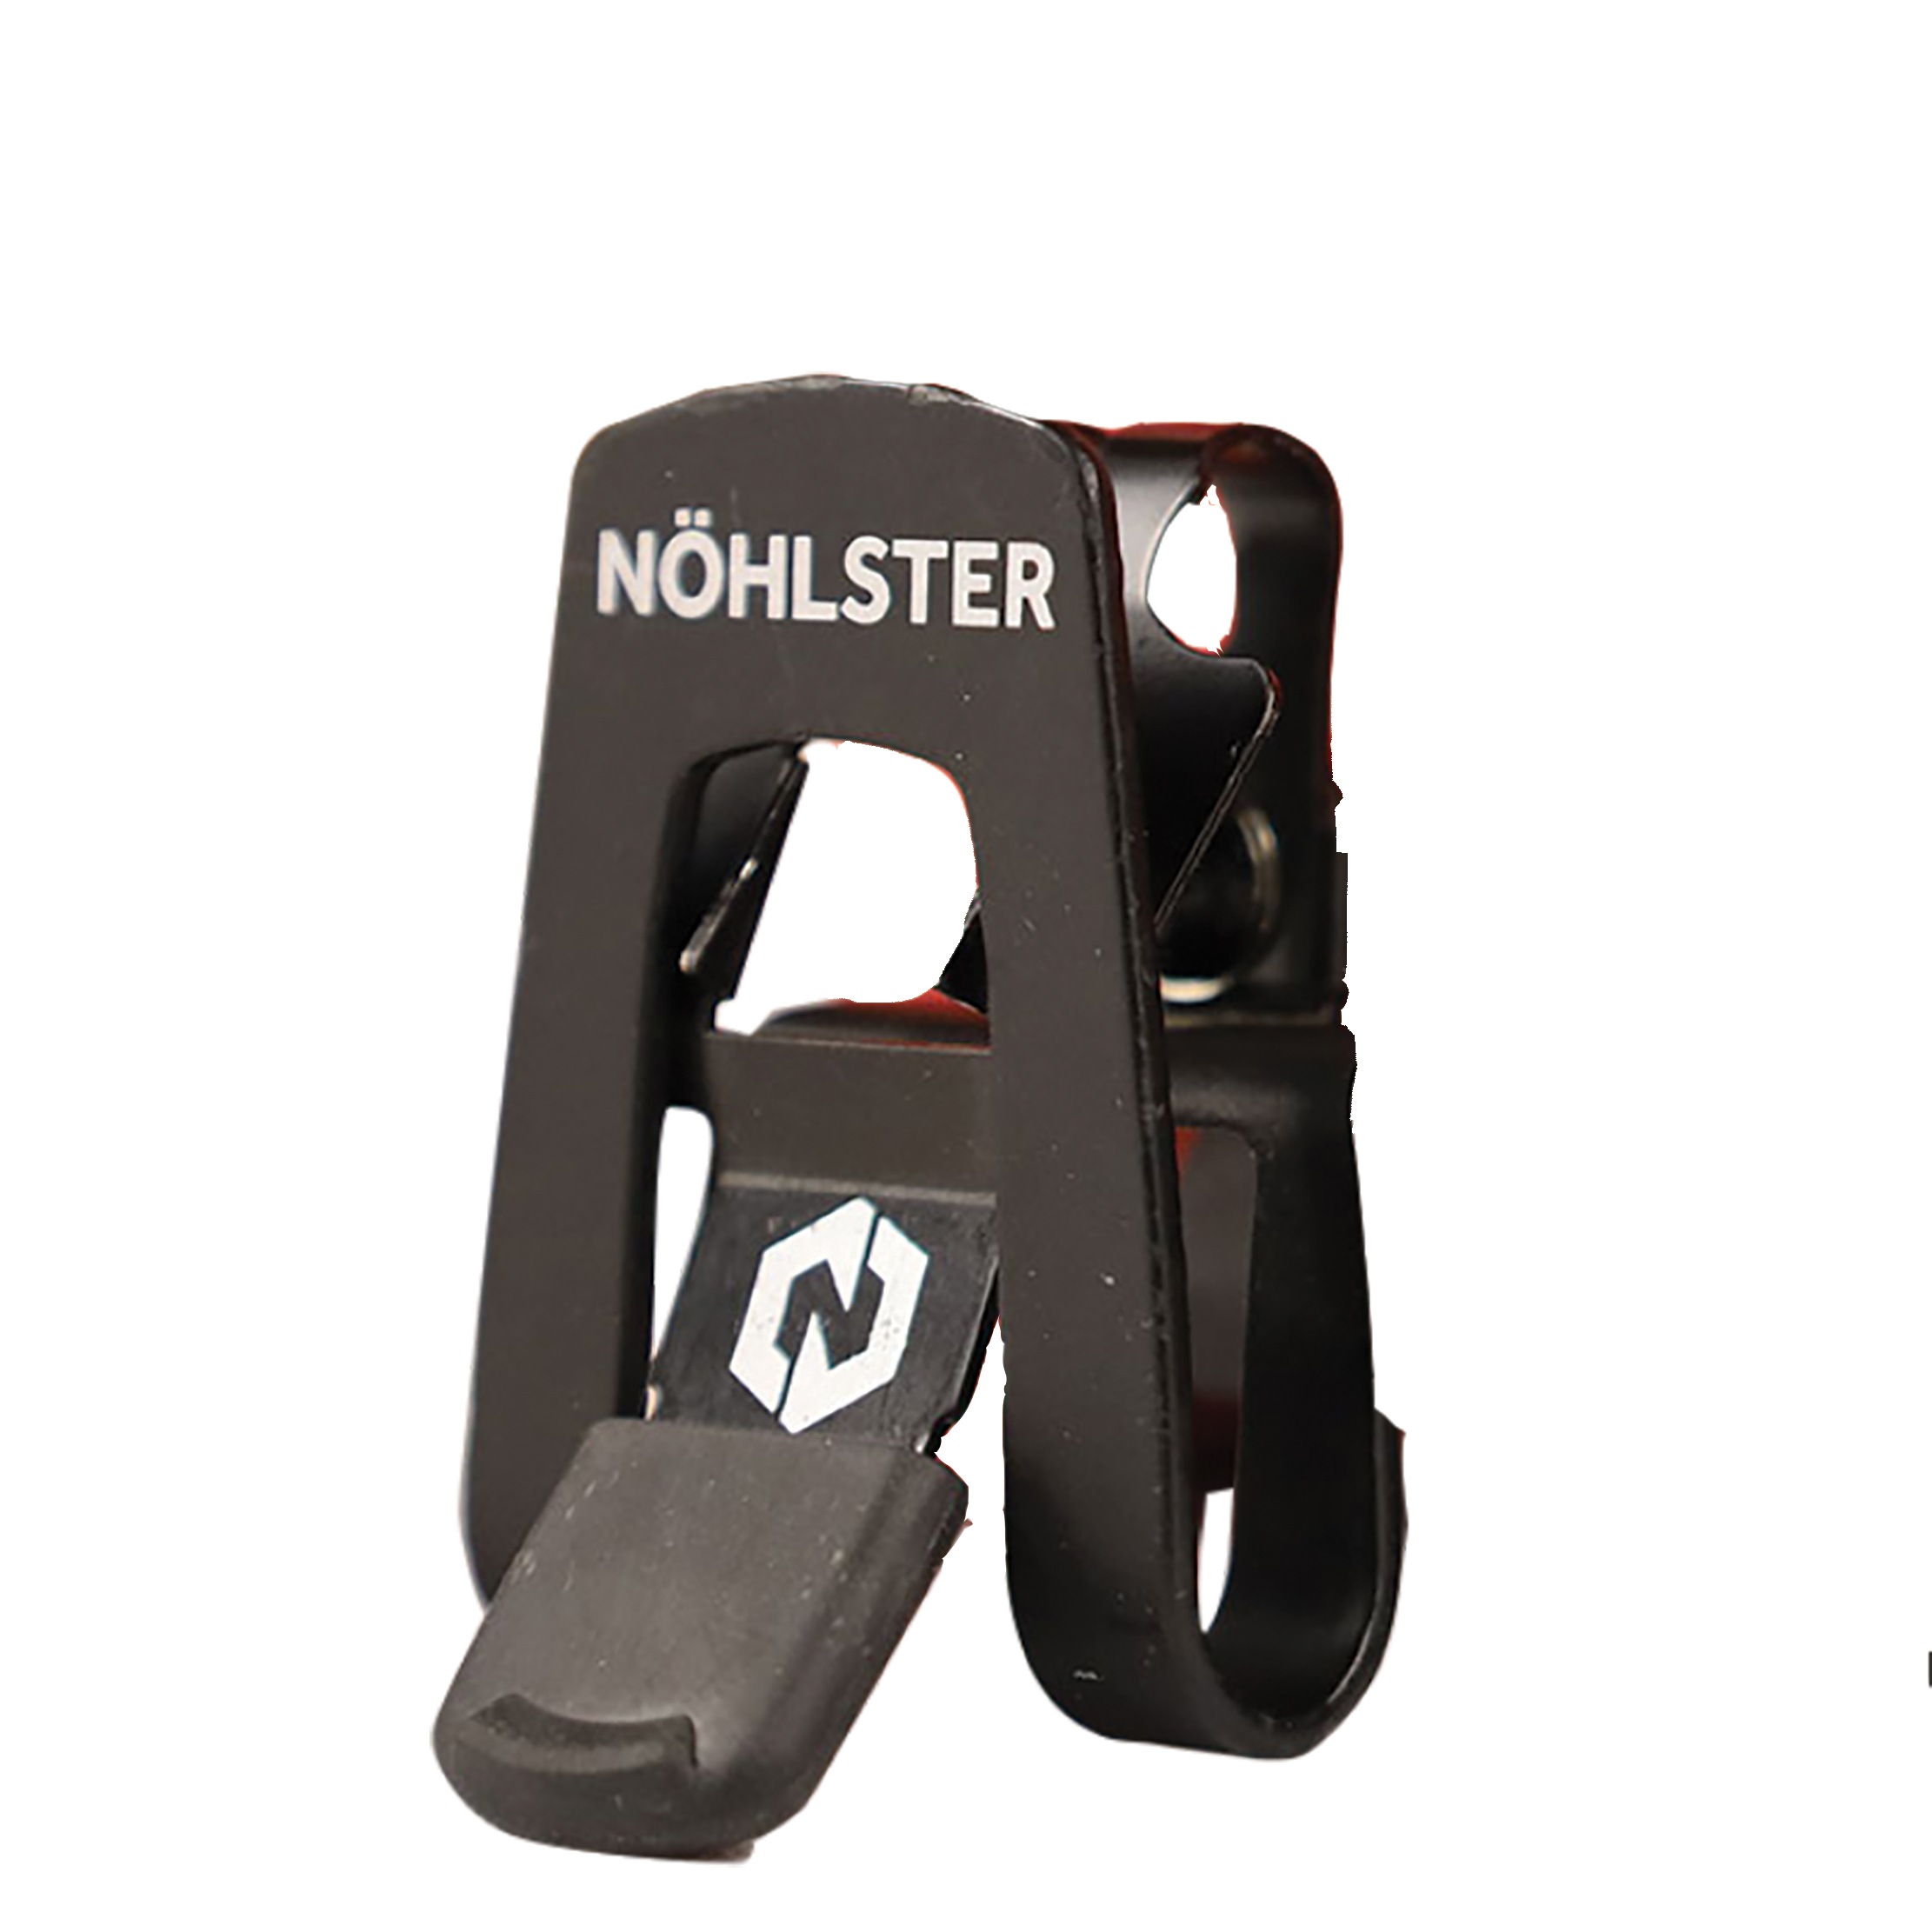 Nohlster Tool Holster